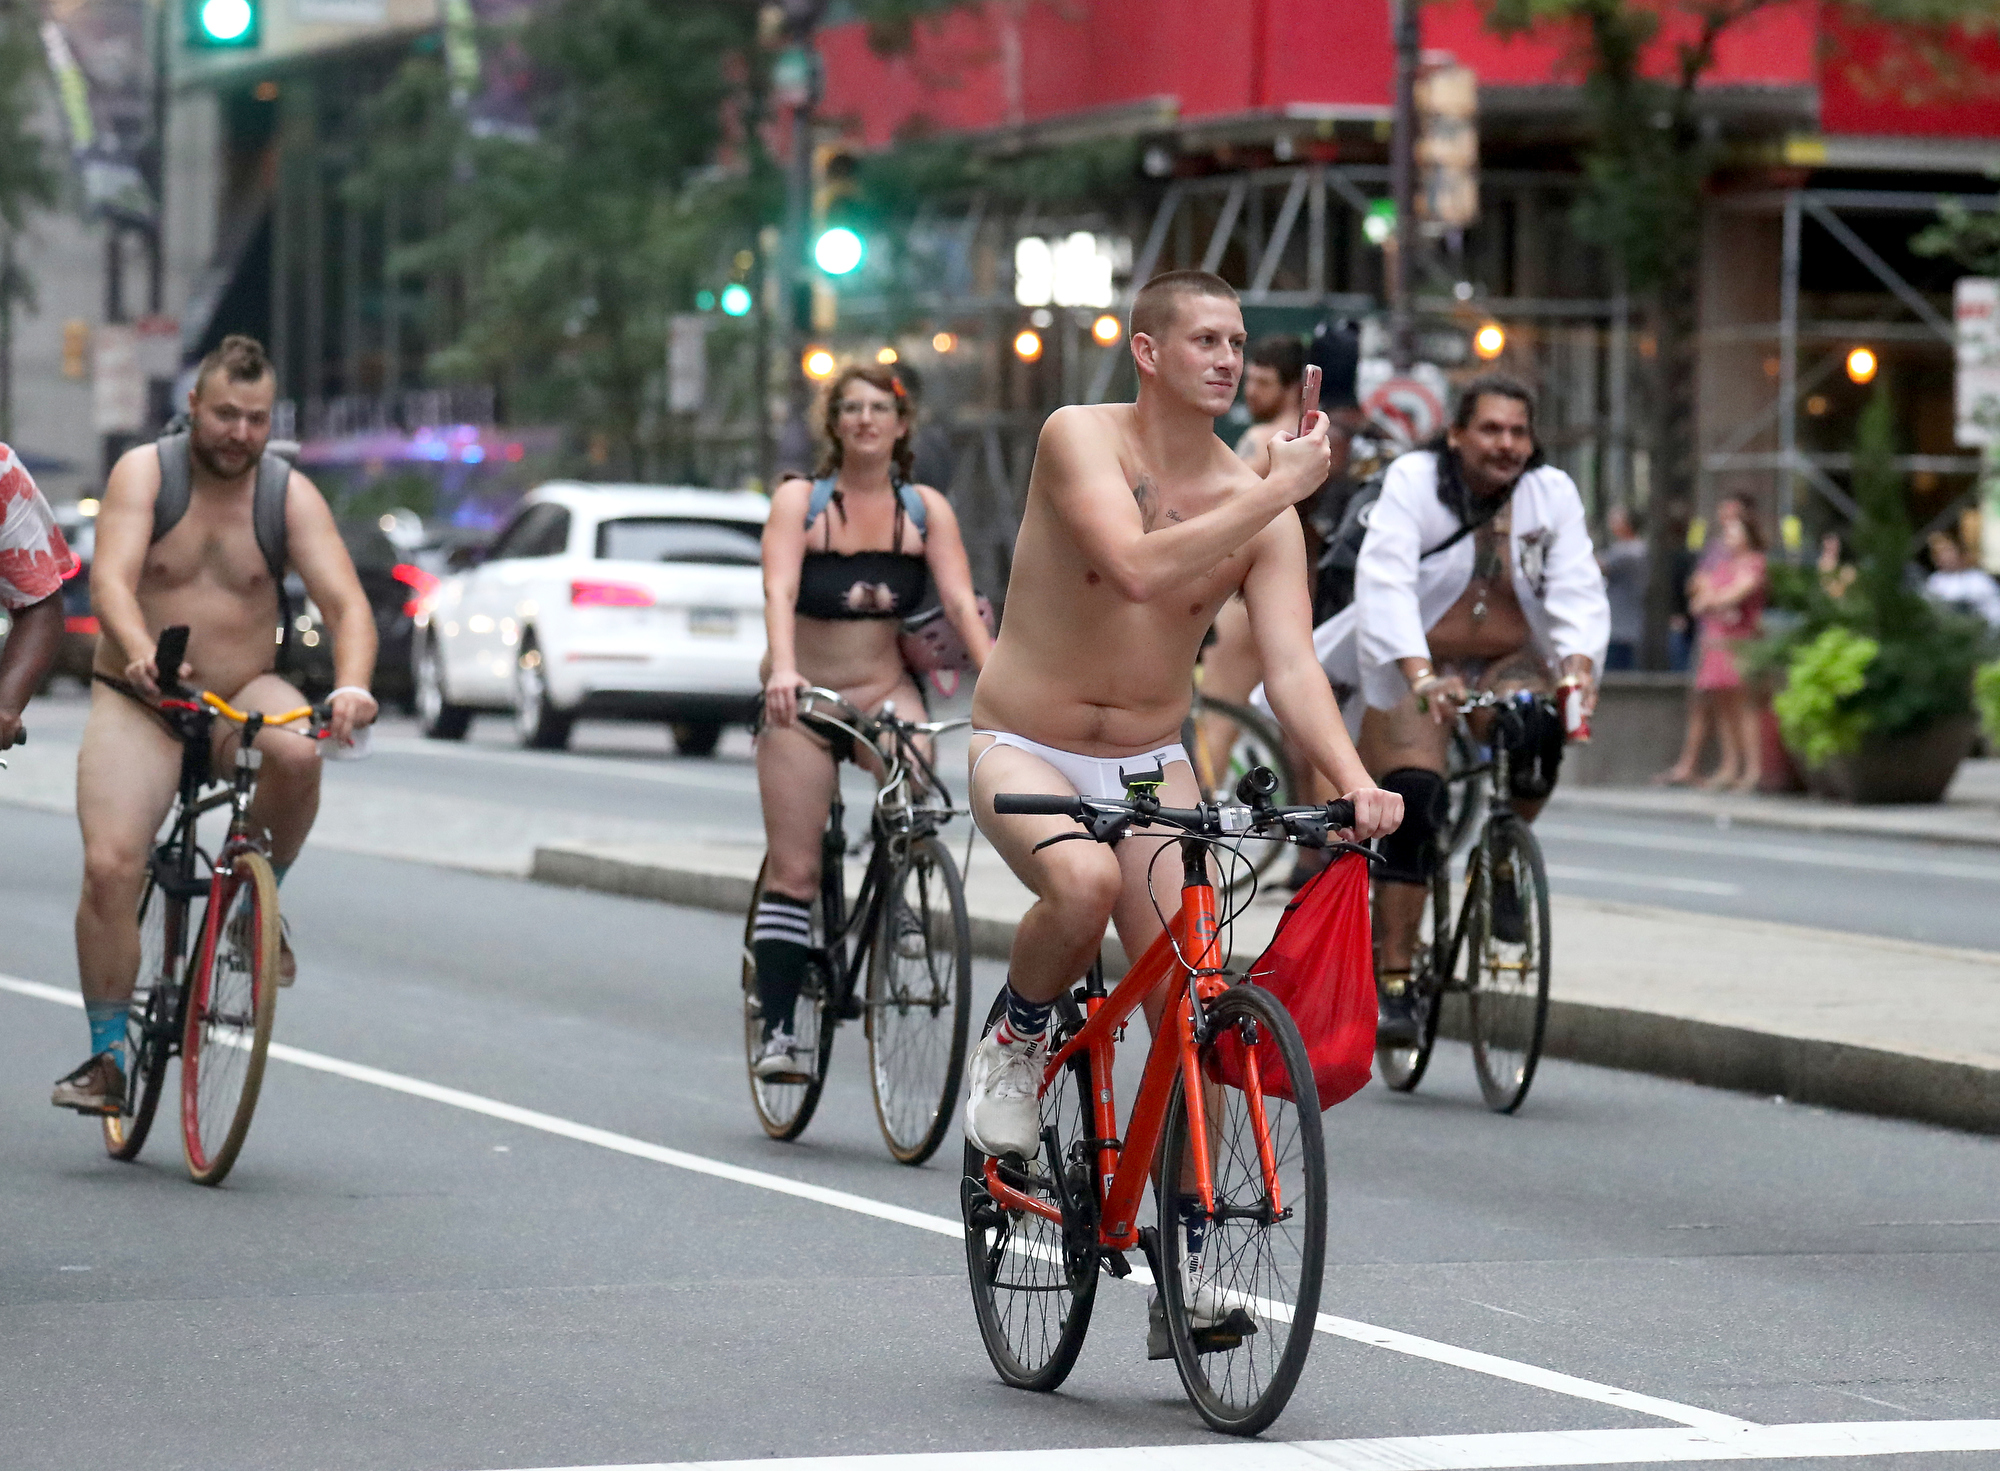 People ride bikes down South Broad Street in Philadelphia during the Philly Naked Bike Ride, Saturday, Aug. 28, 2021.